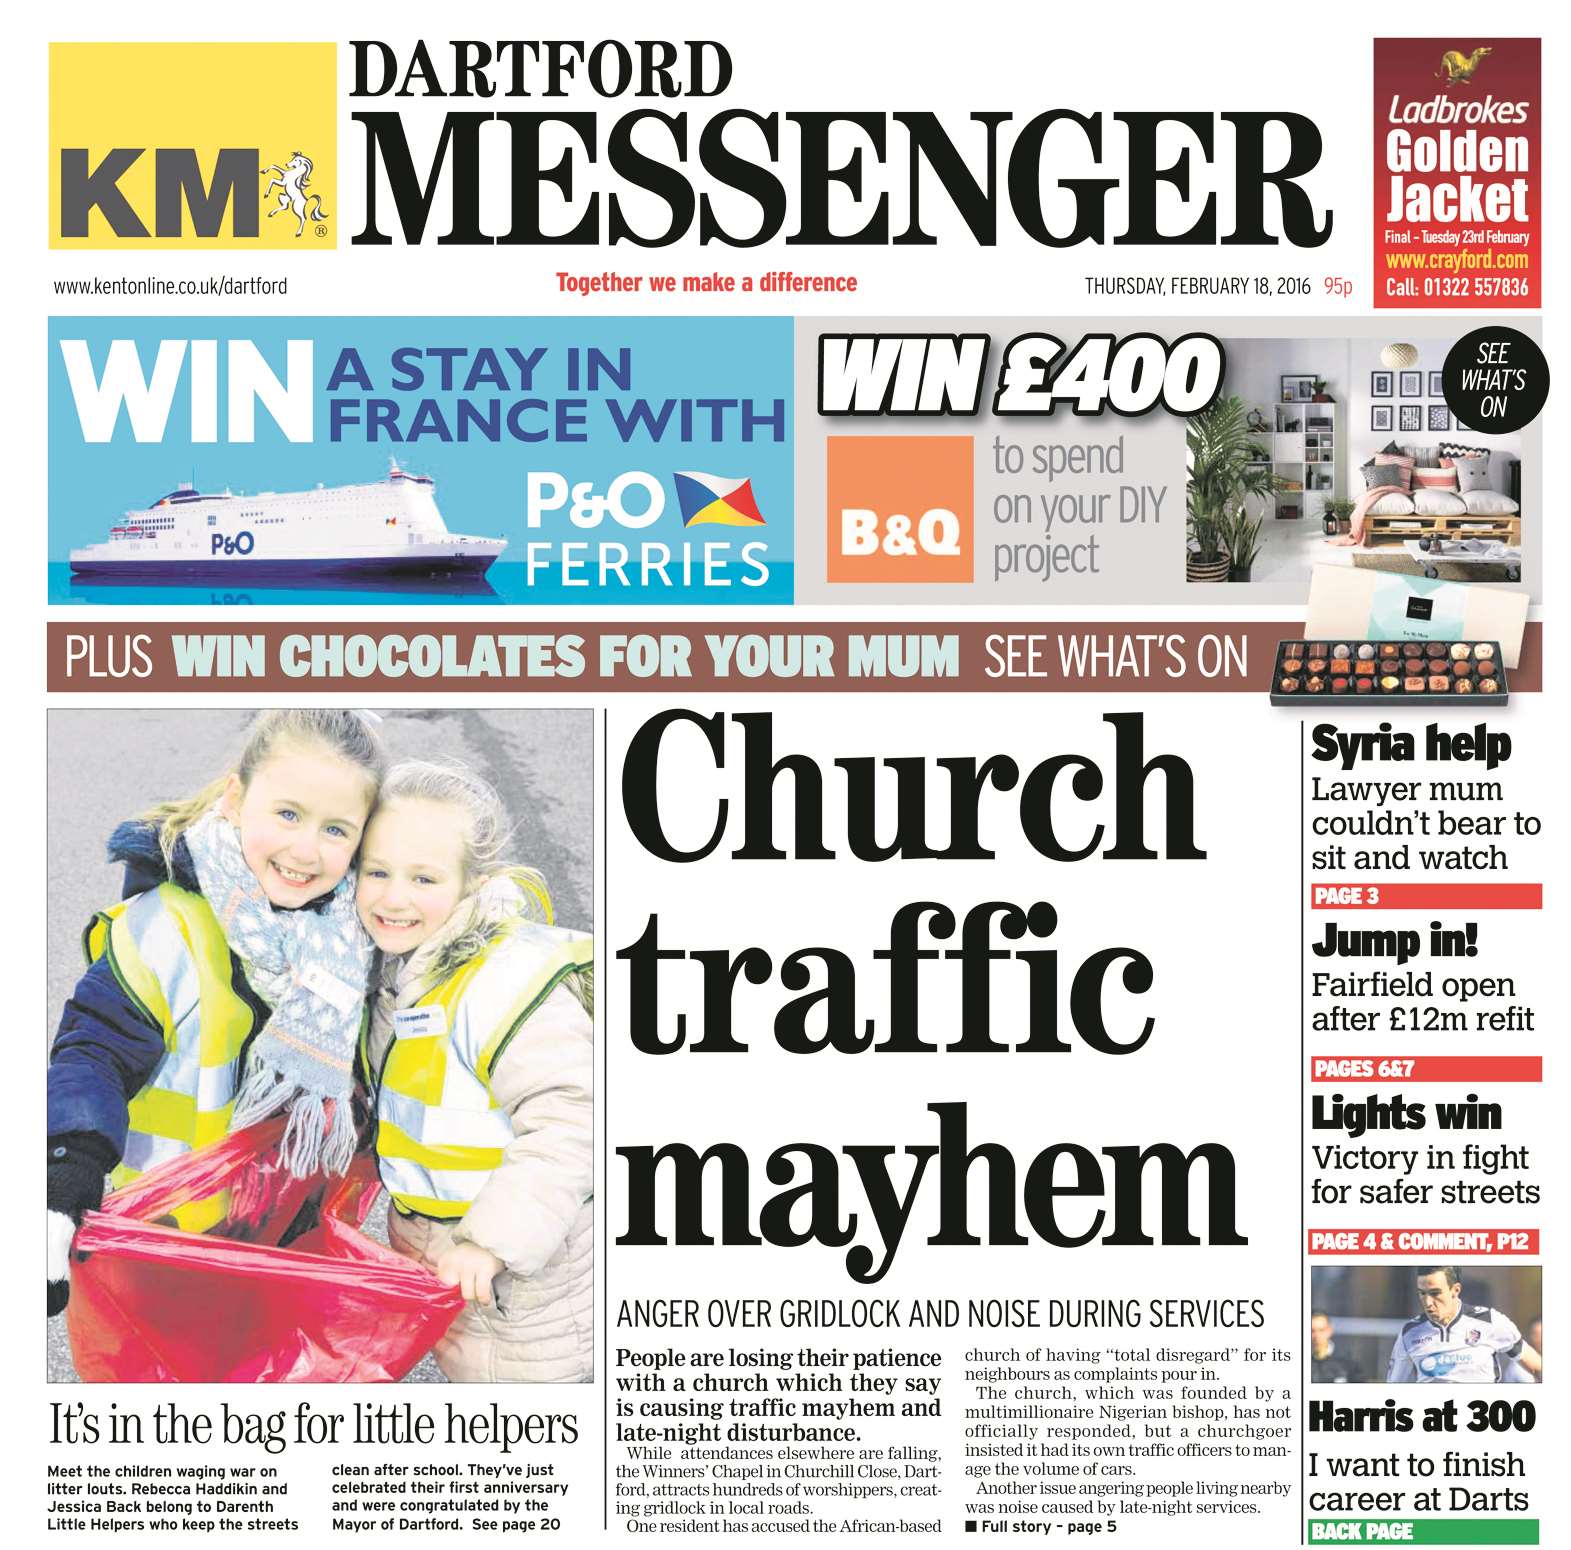 Last week's Dartford Messenger revealed the full extent of the traffic chaos surrounding Winners' Chapel.